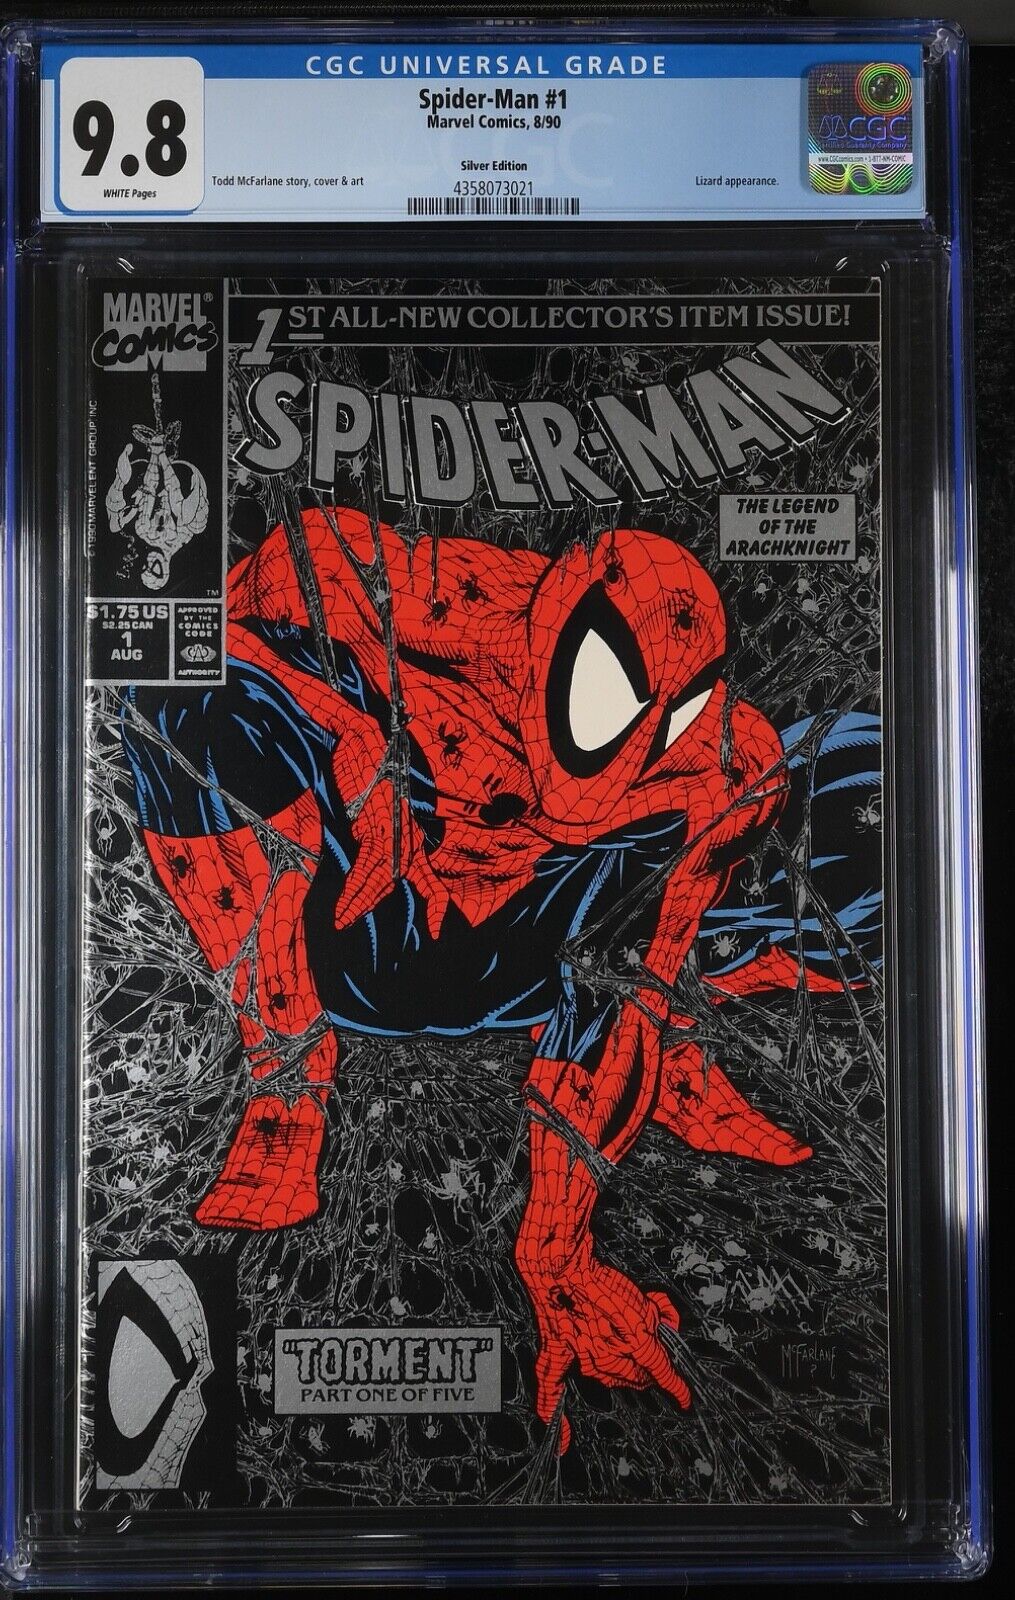 SPIDER-MAN (1990 MARVEL) #1SILVER CGC 9.8 W/P TODD MCFARLANE STORY, COVER & ART